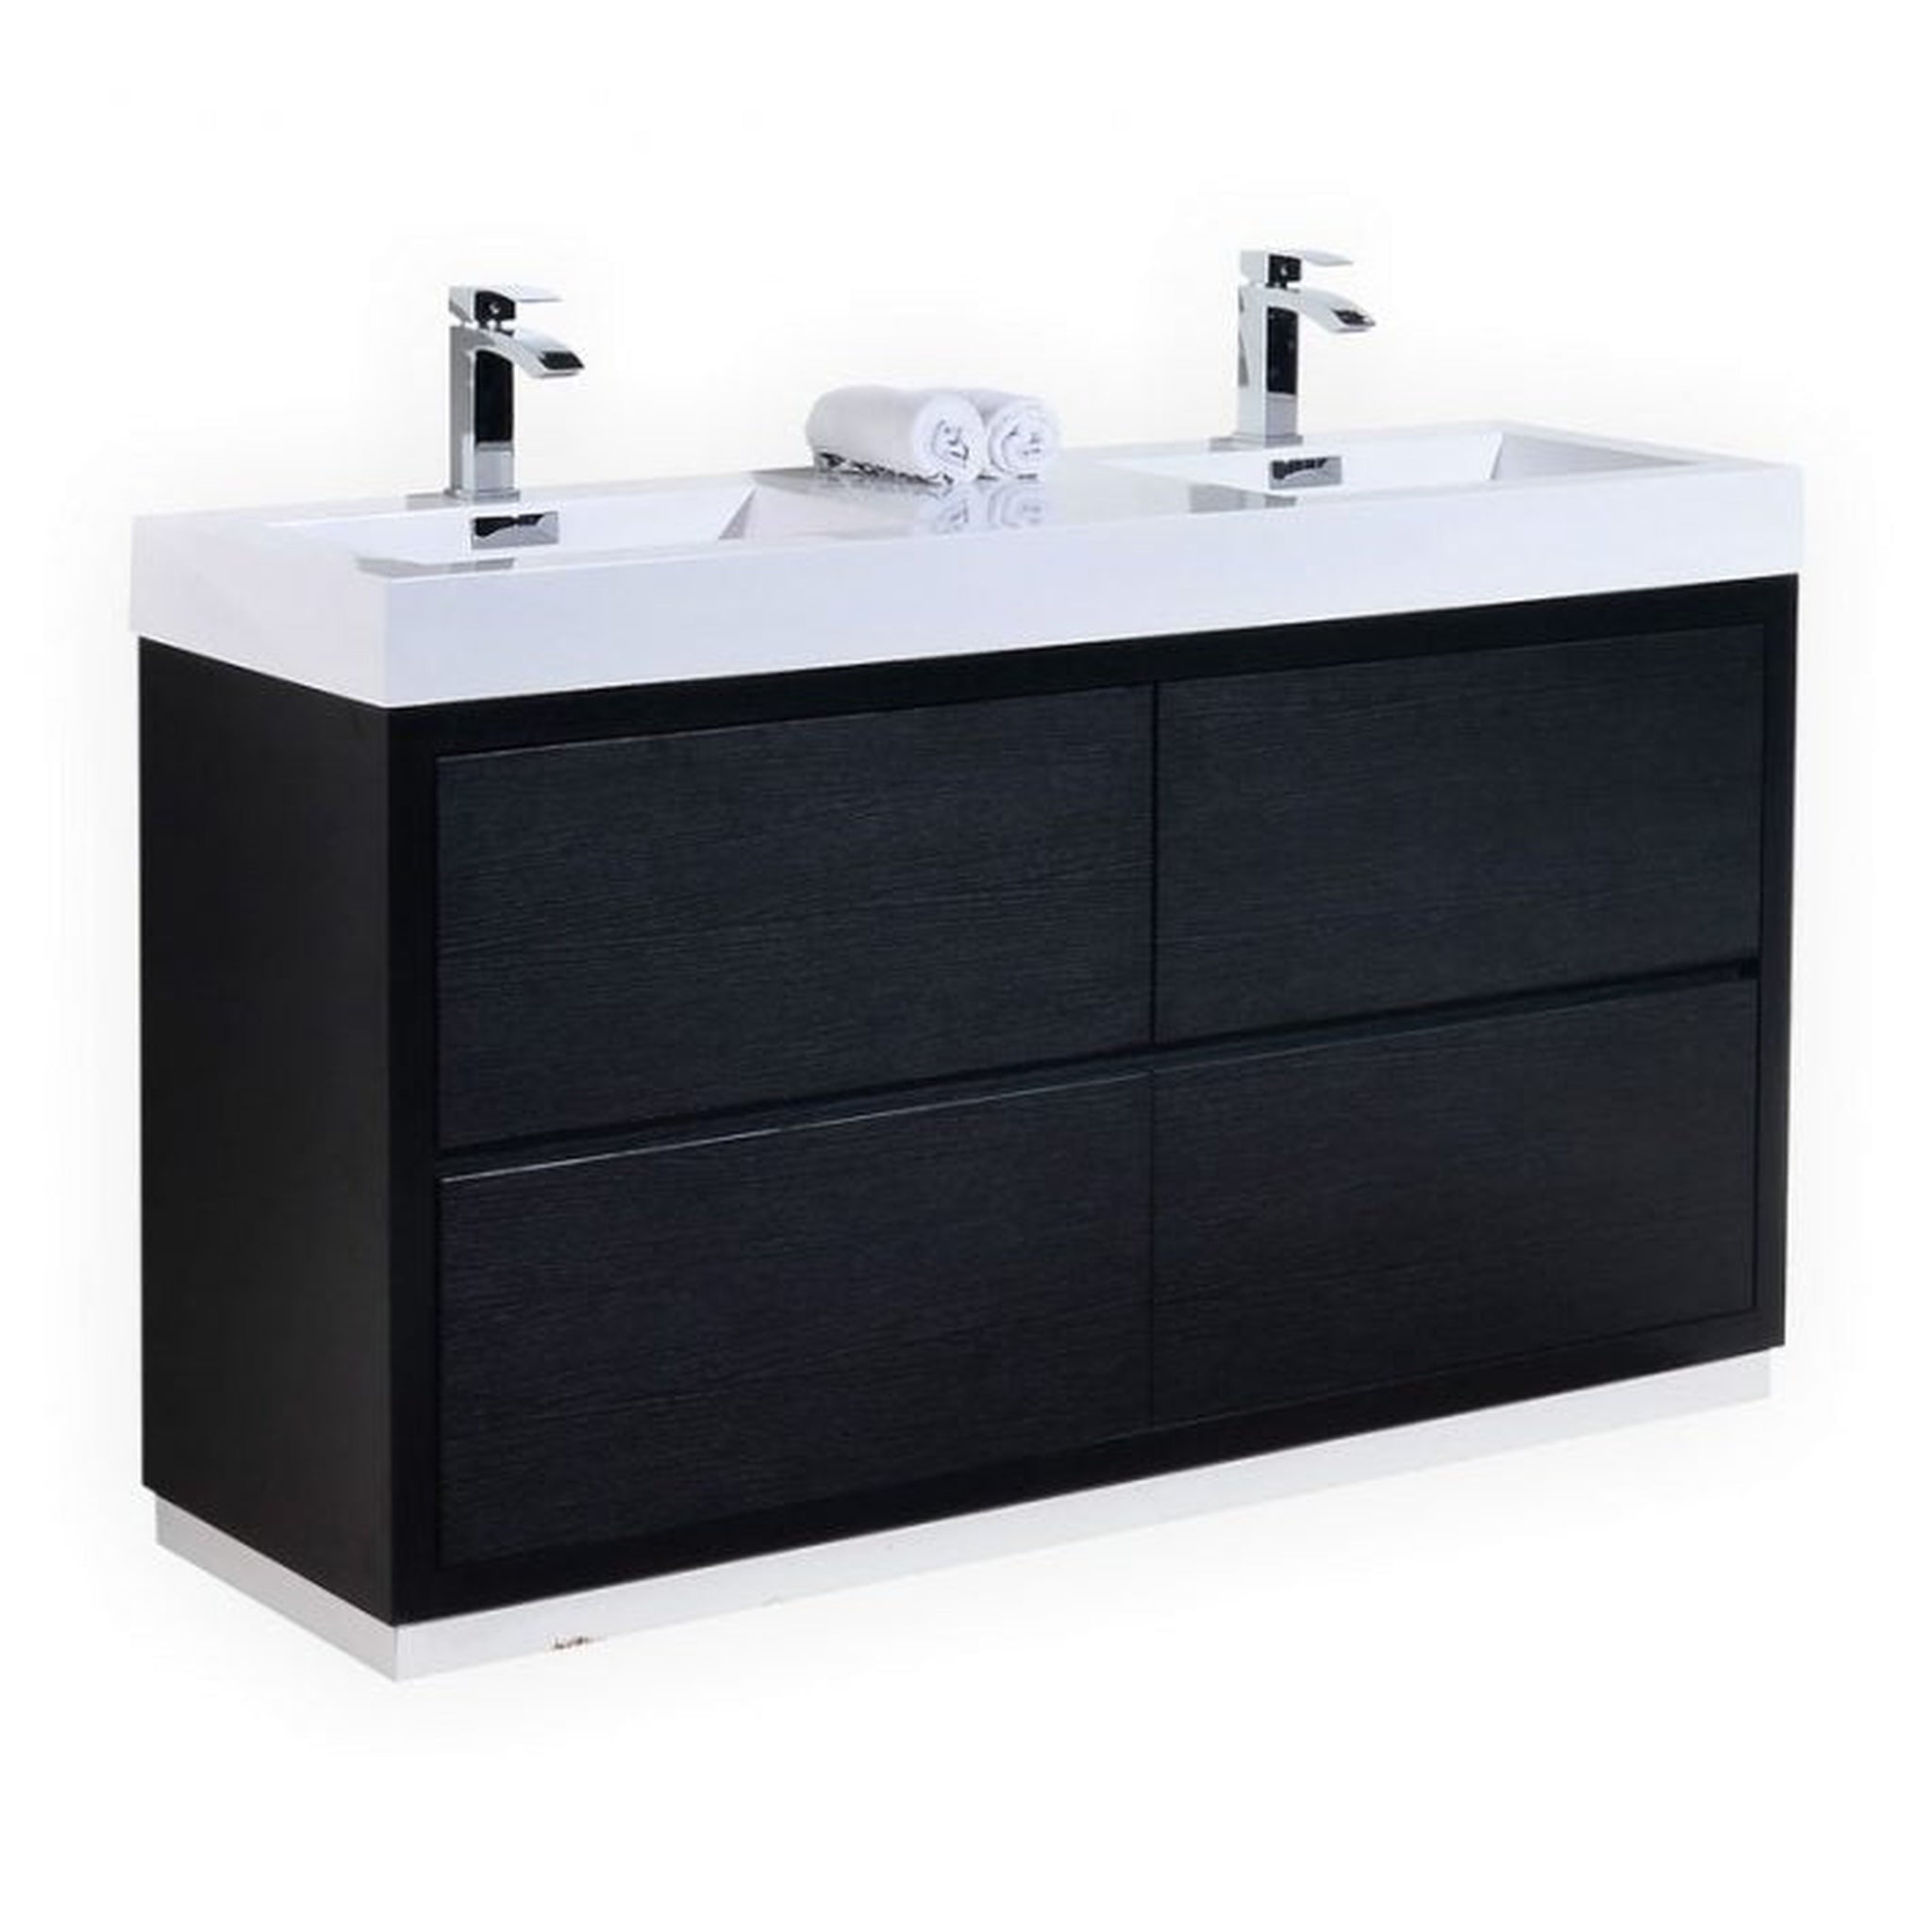 https://cdn.shopify.com/s/files/1/0555/9527/0317/products/KubeBath-Bliss-60-Black-Freestanding-Modern-Bathroom-Vanity-With-Double-Integrated-Acrylic-Sink-With-Overflow-And-55-Black-Framed-Mirror-With-Shelf.jpg?v=1672888848